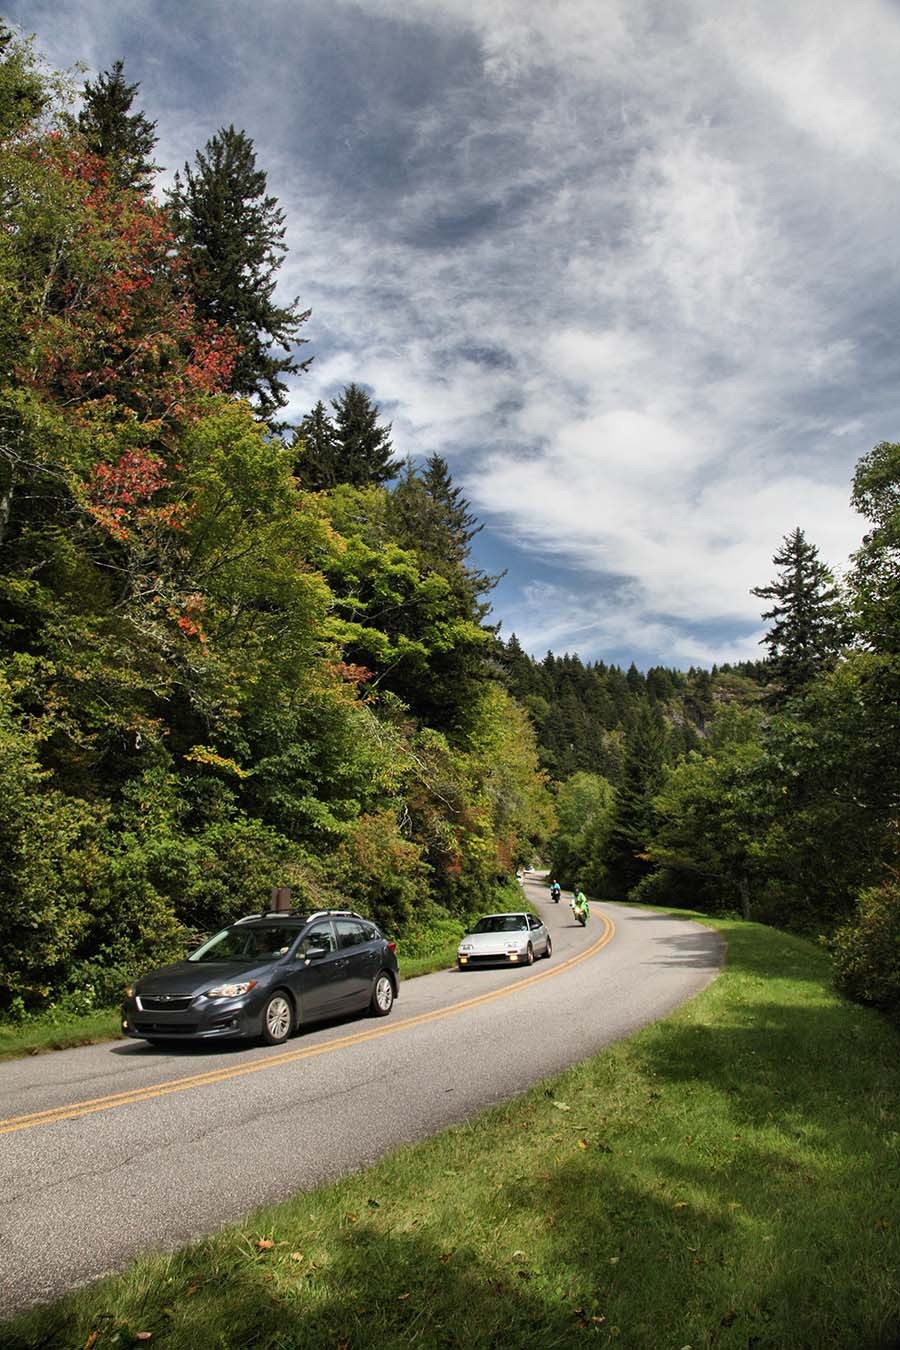 Cars traveling the Blue Ridge Parkway near Mount Pisgah in North Carolina. Photo by A. Armstrong